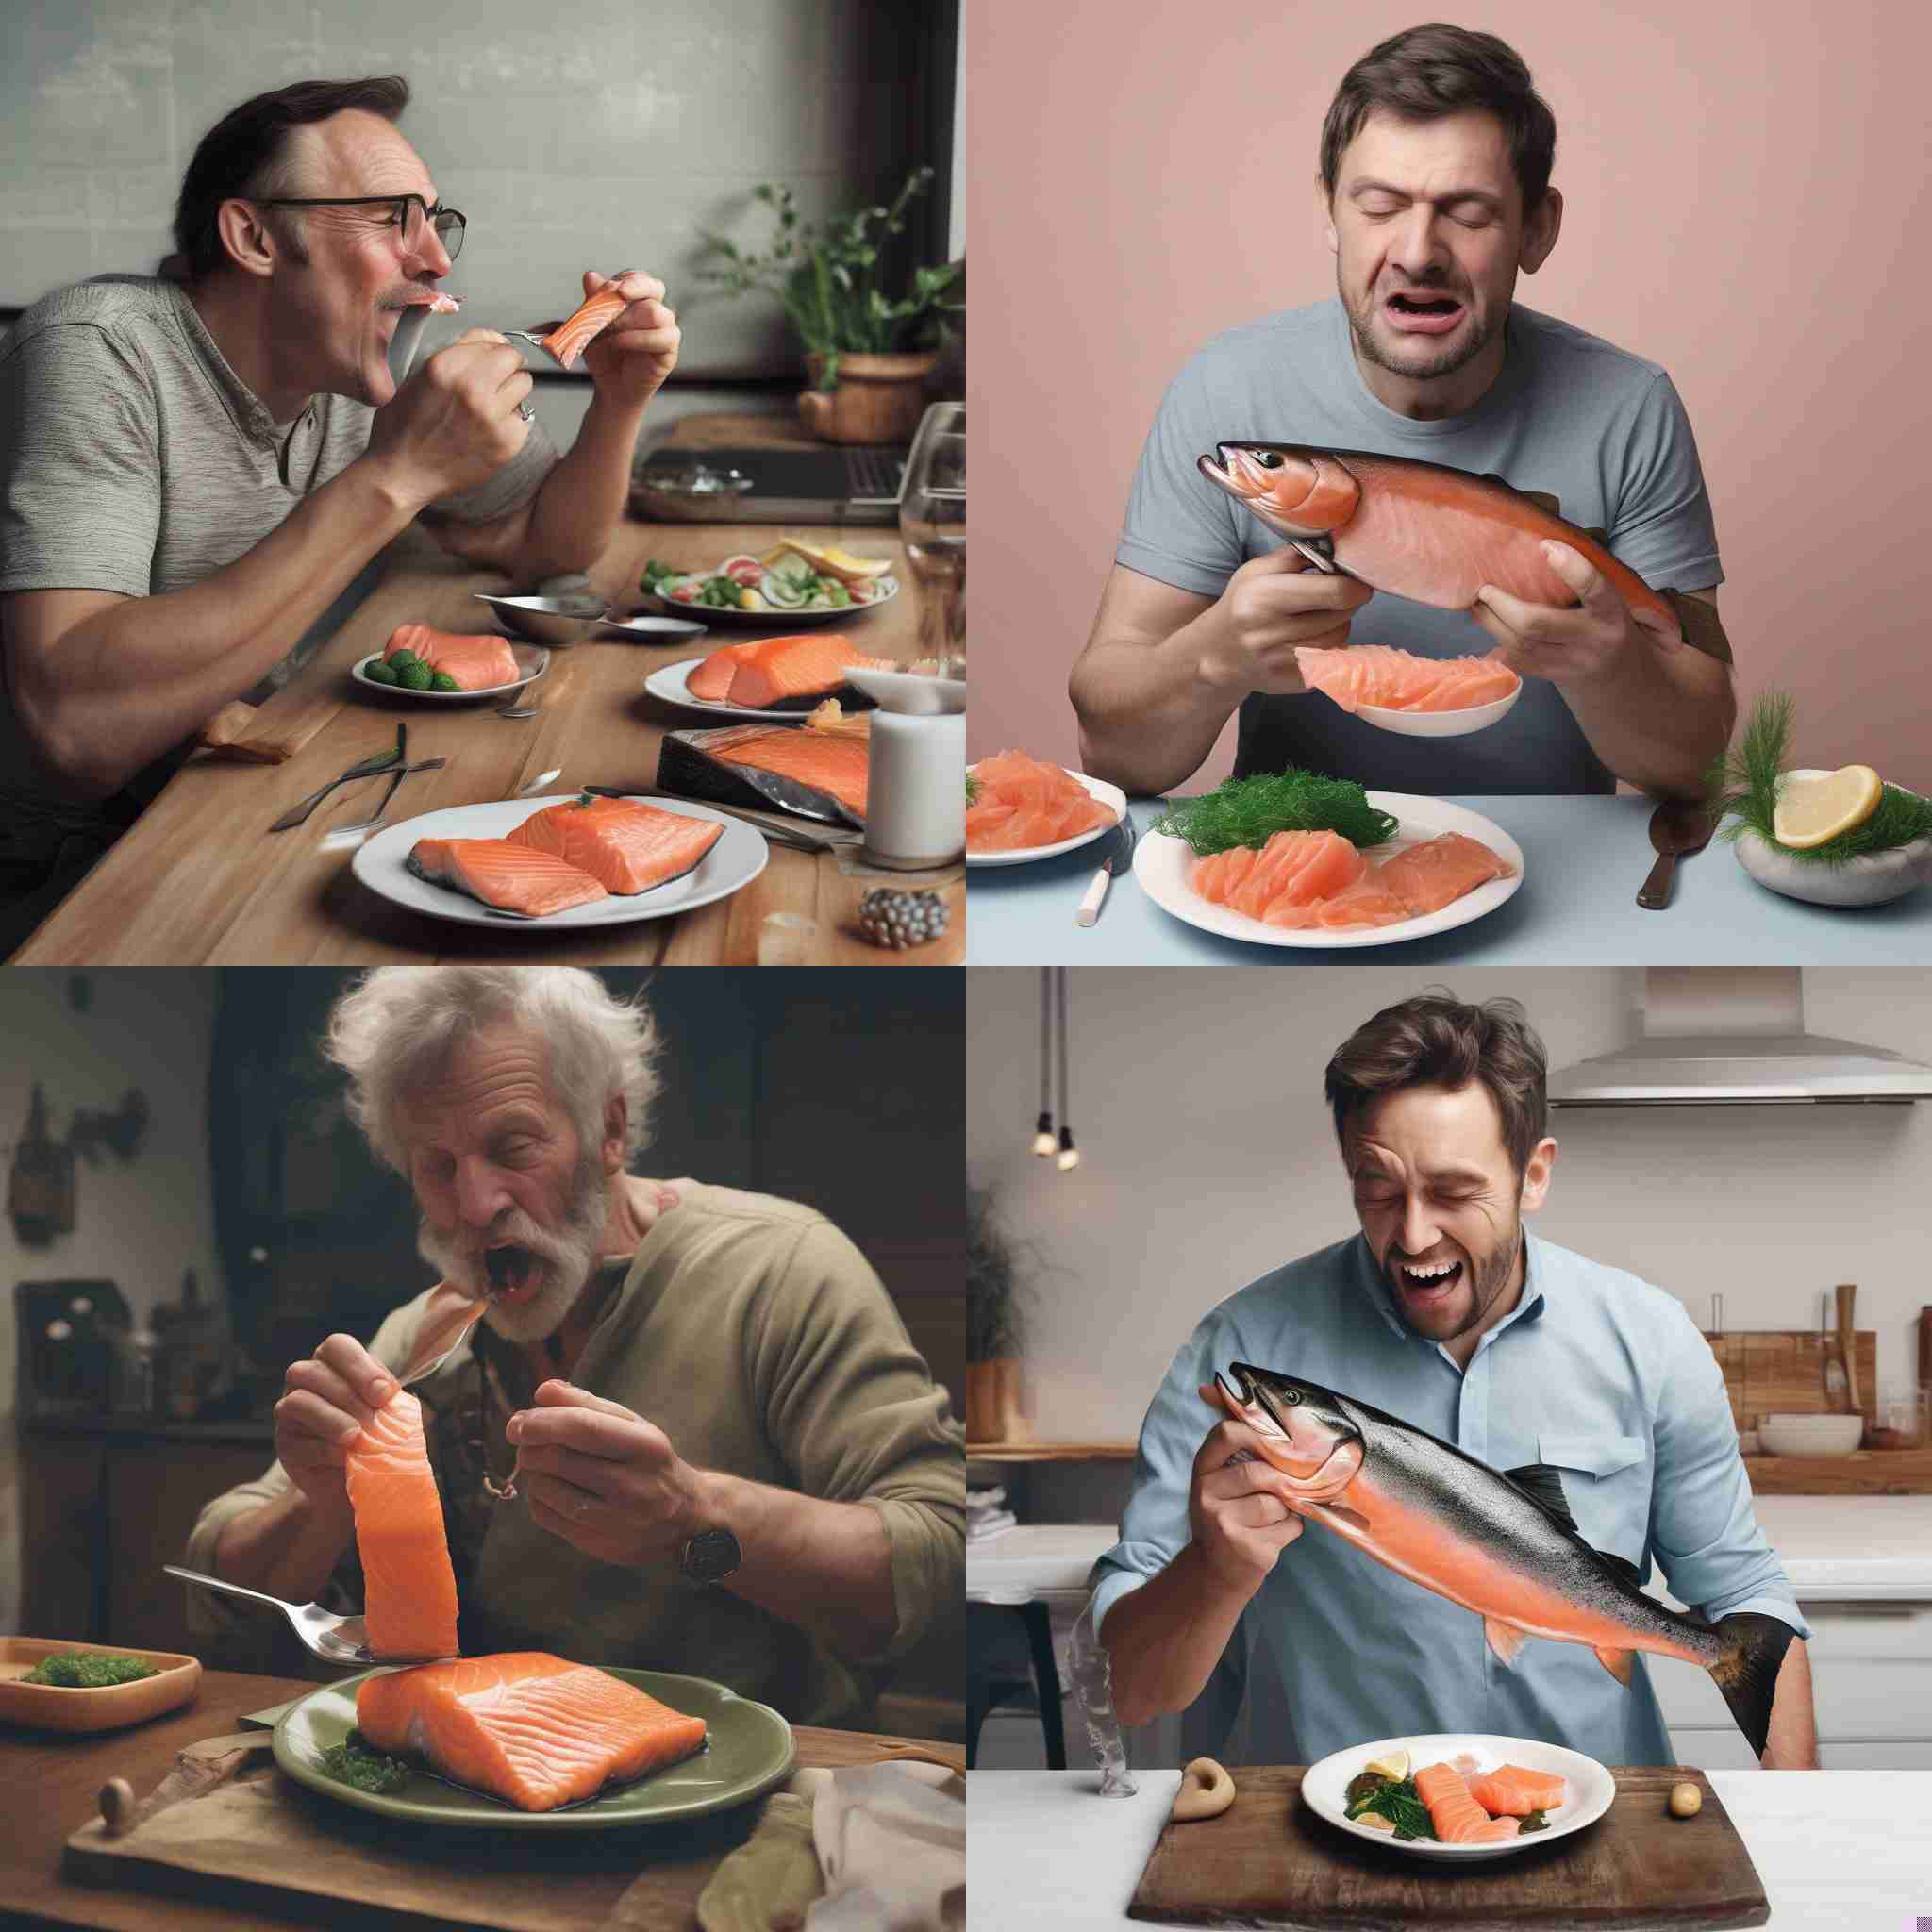 A person eating salmon